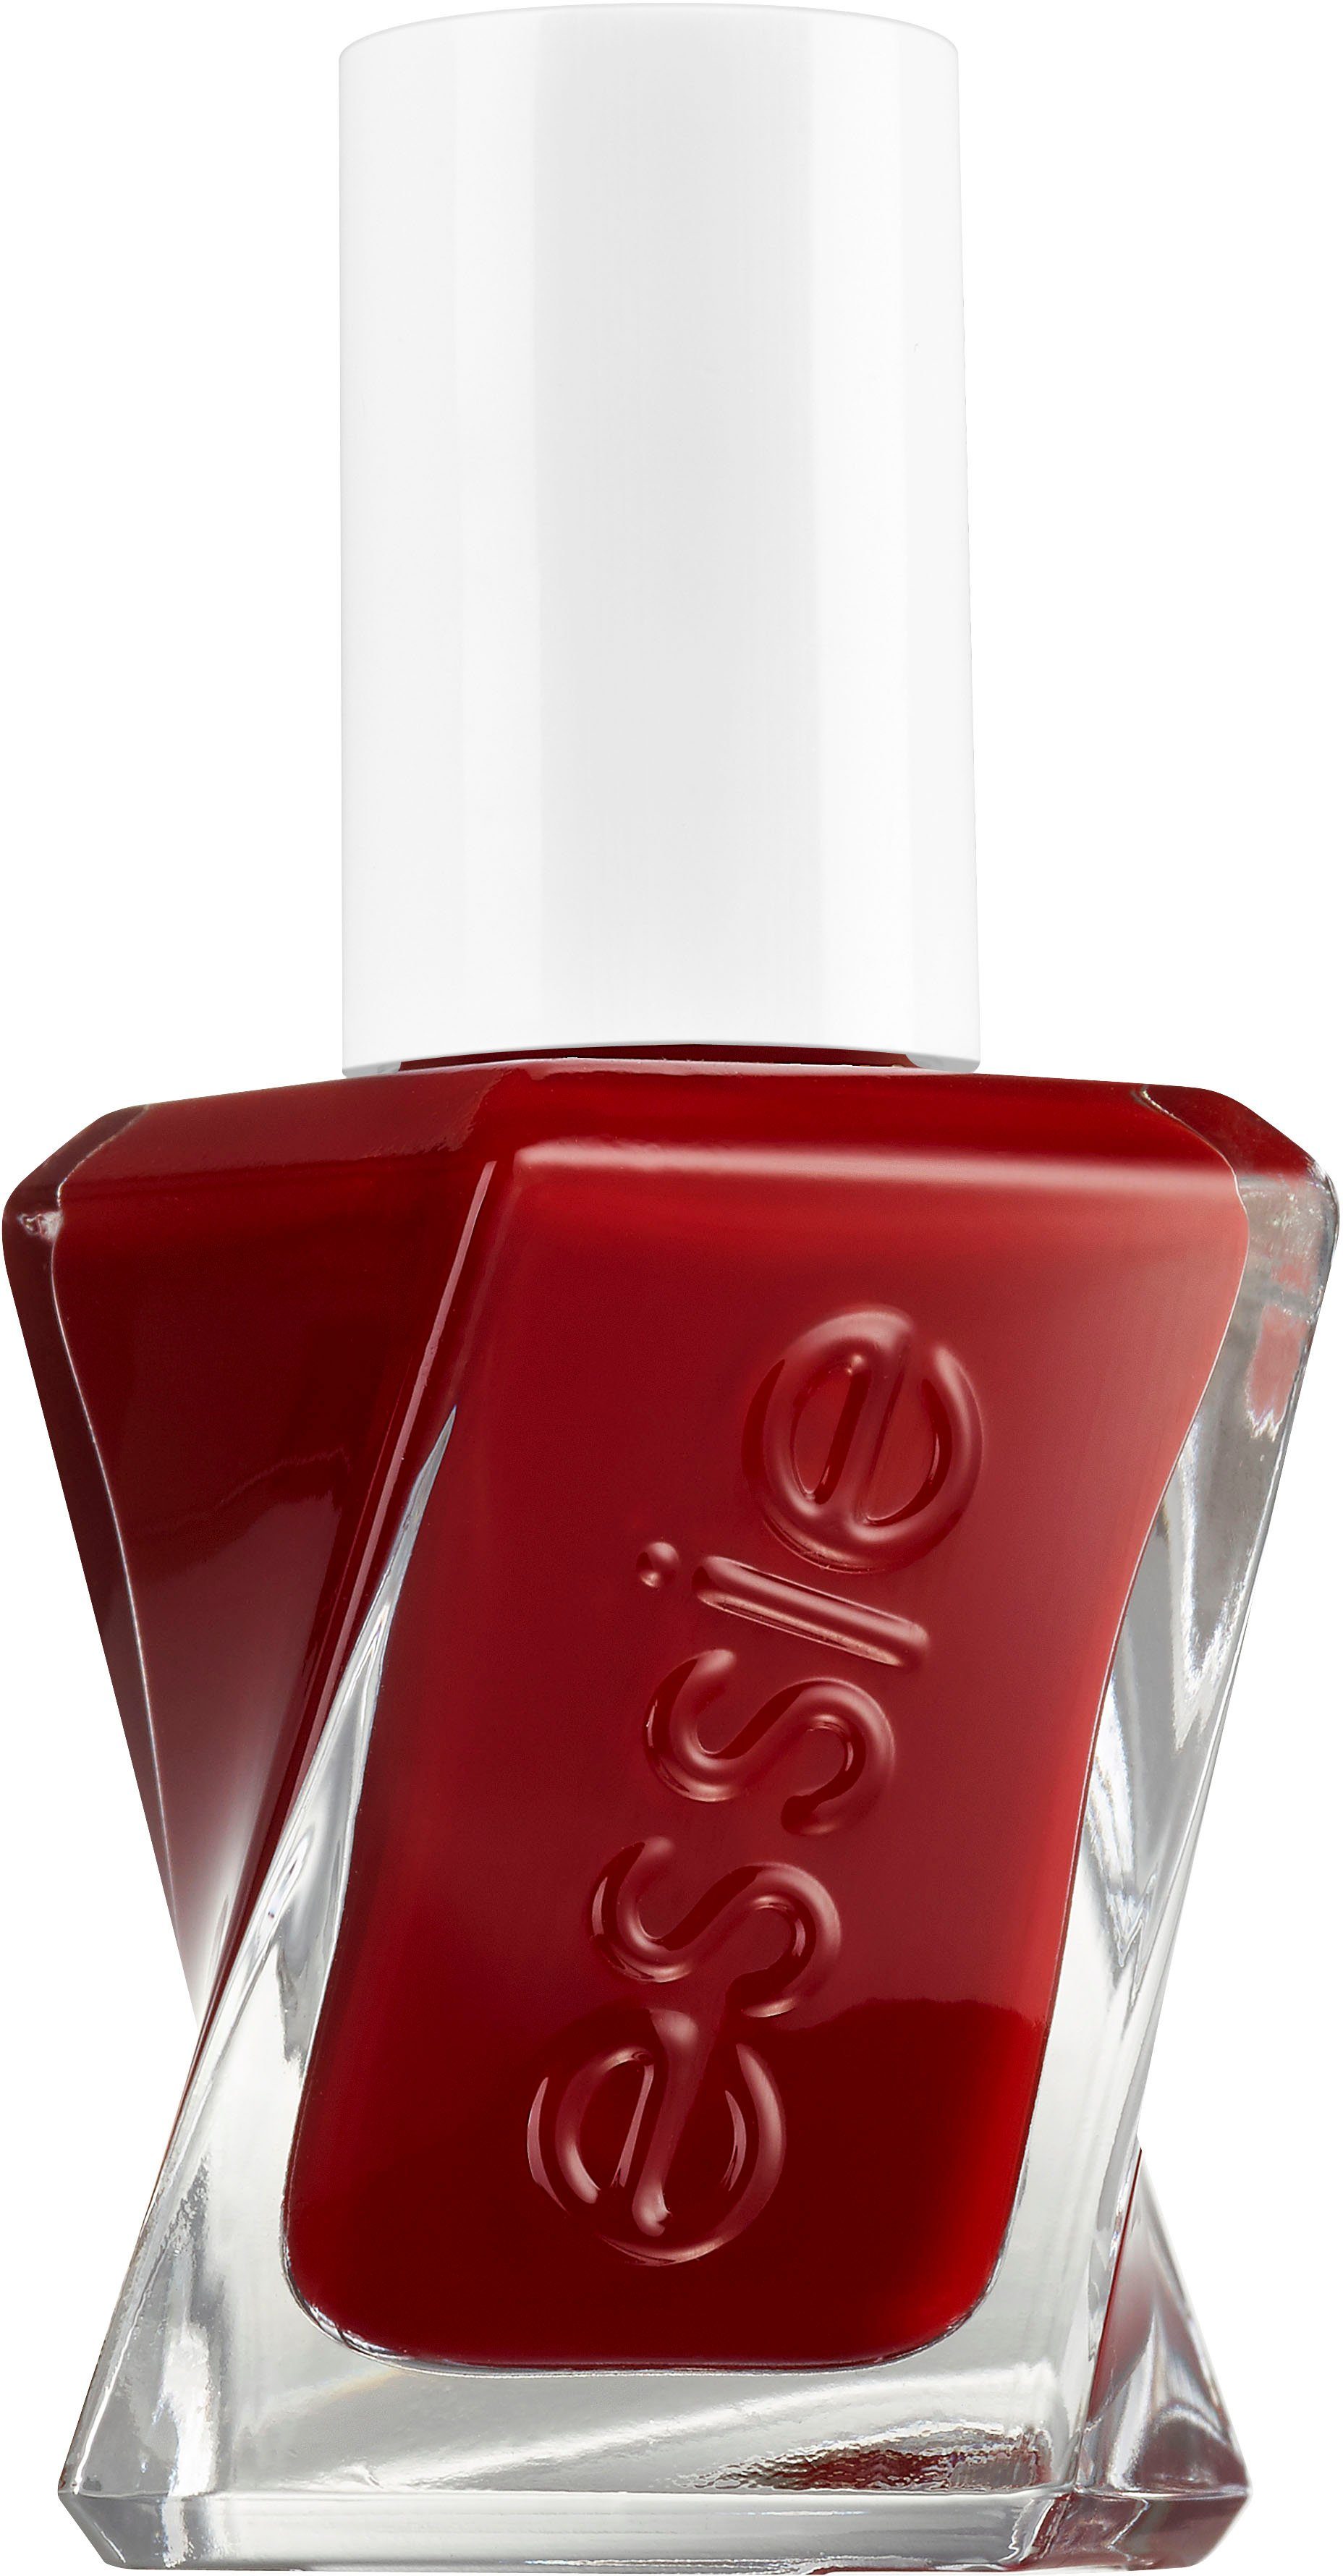 Rot Gel only Gel-Nagellack 345 essie bubbles Nr. Couture